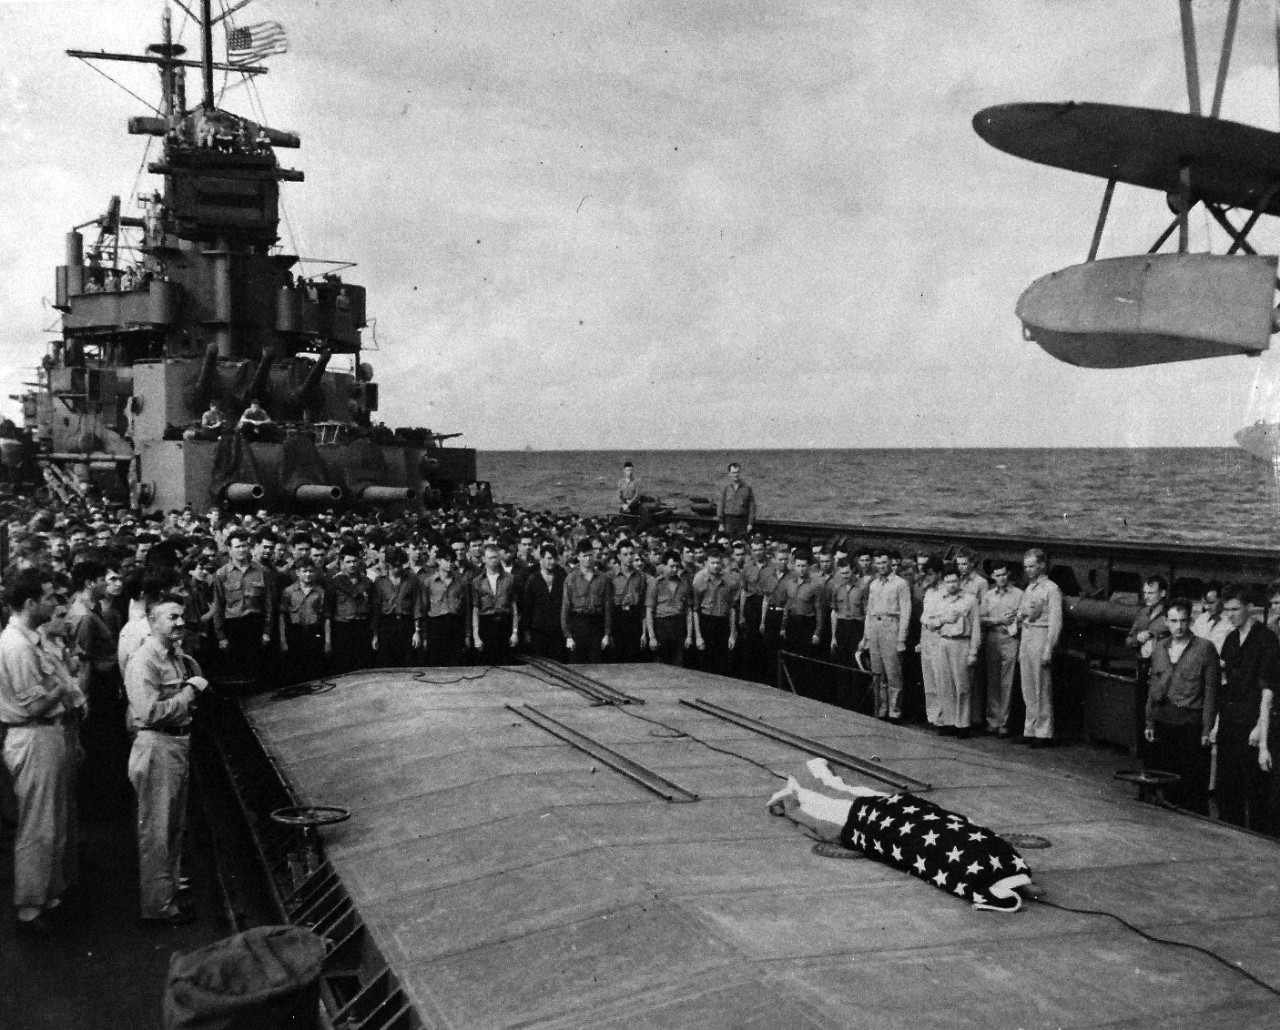 80-G-54558:  Battle of Kula Gulf, July 5-6, 1943.     Funeral service aboard USS Honolulu (CL-48) for Irvin L. Edwards who died aboard USS Nicholas (DD-449) after being picked up when USS Helena (CL-50) was sunk July 6, 1943.   Note Rear Admiral Walden L. Ainsworth, left.     Photograph, July 1943.   Official U.S. Navy photograph, now in the collections of the National Archives.   (2016/07/19).